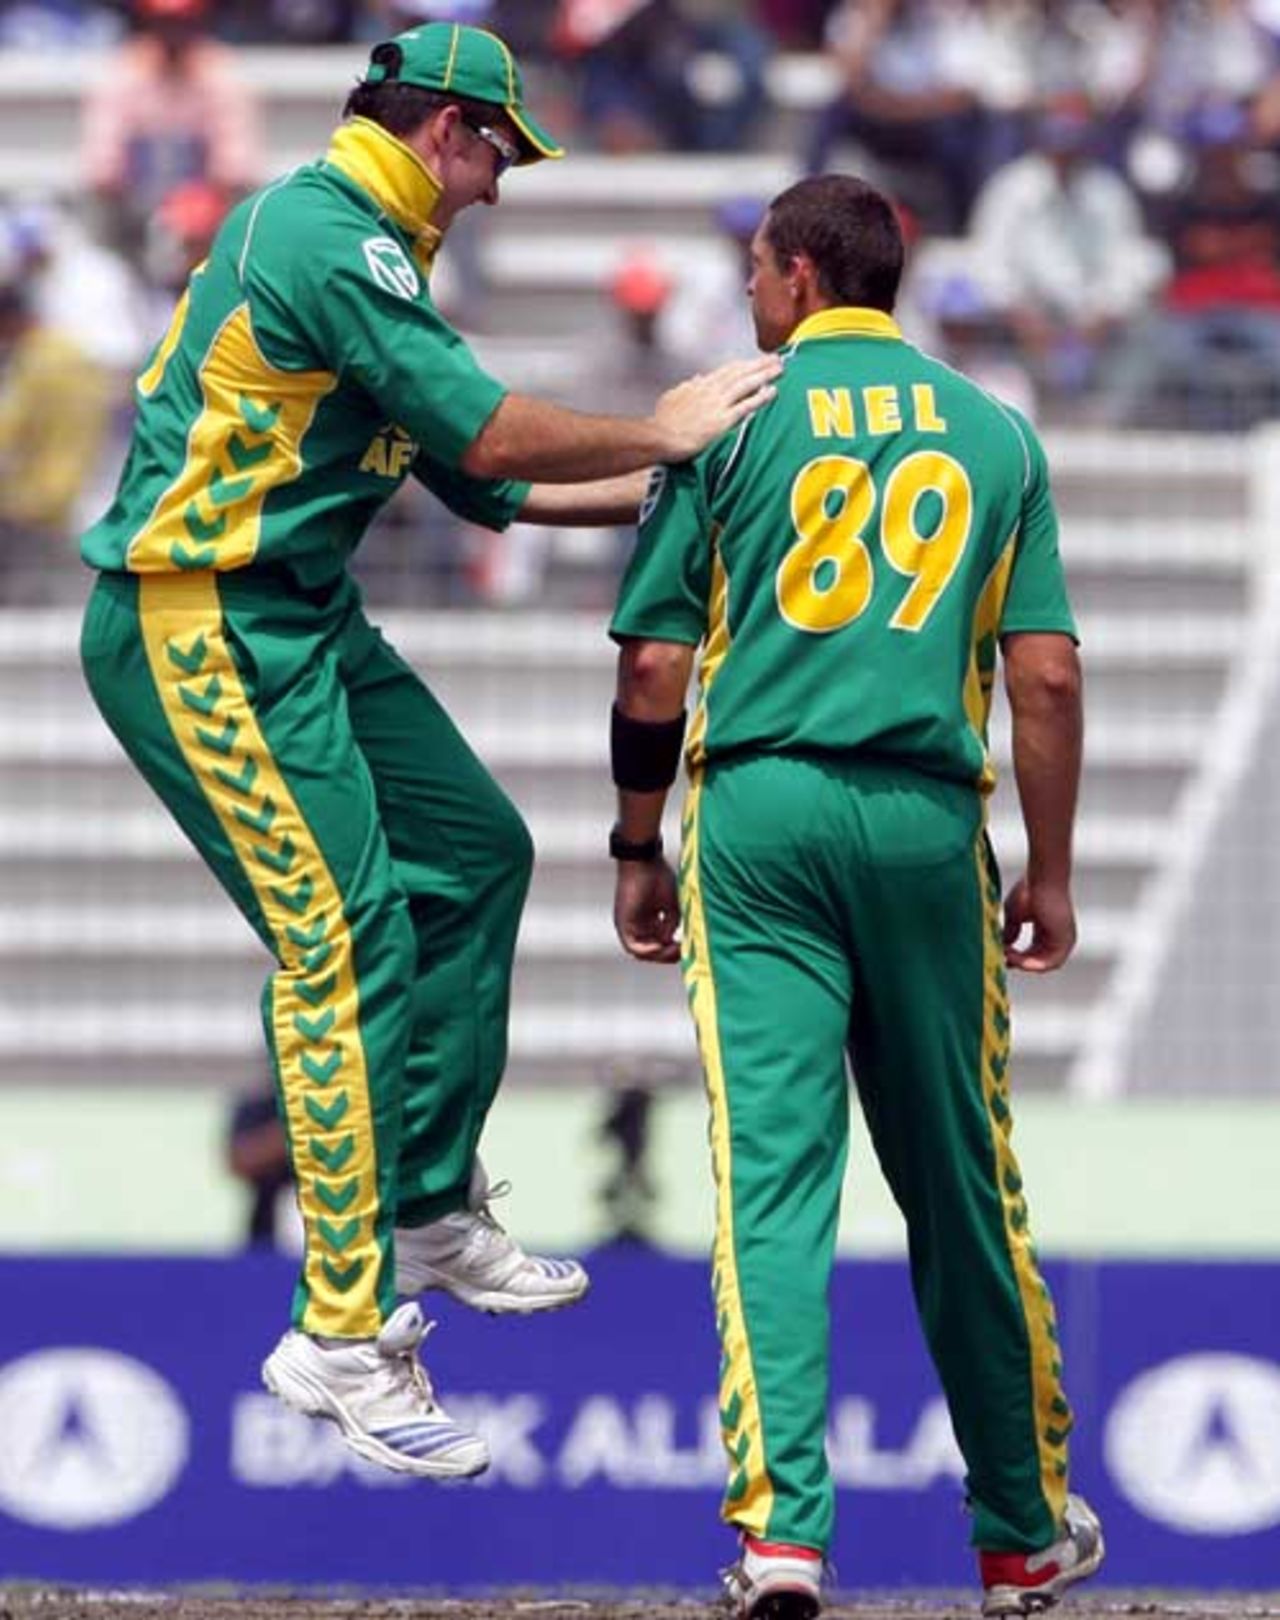 Andre Nel gets a pat on the back from Graeme Smith, Bangladesh v South Africa, 2nd ODI, Mirpur, March 12, 2008